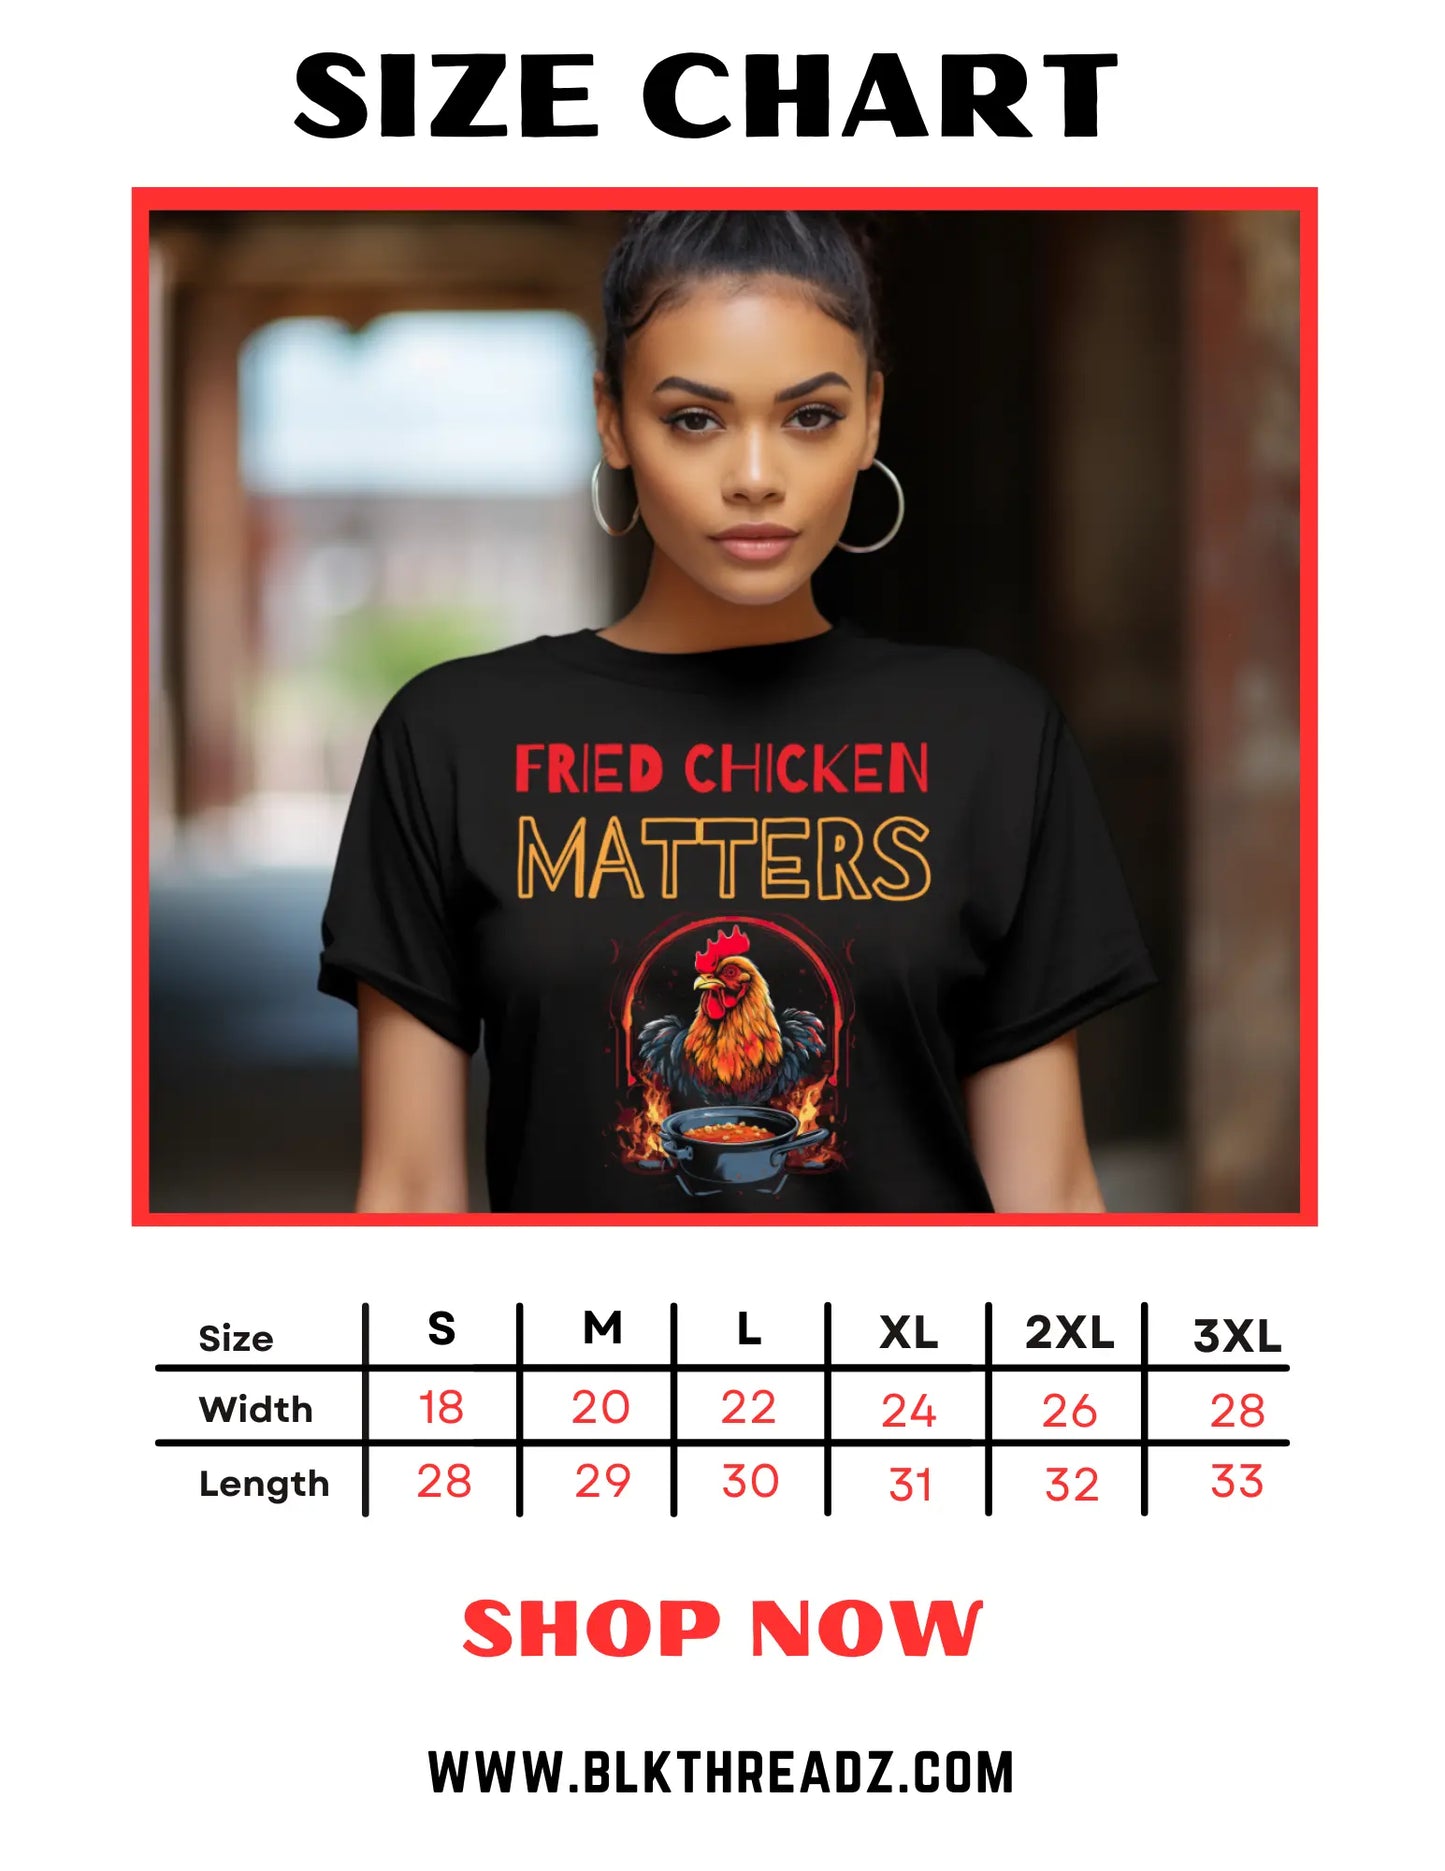 Watch Out for the Big Girl: Bold Statement T-Shirt - Black Threadz